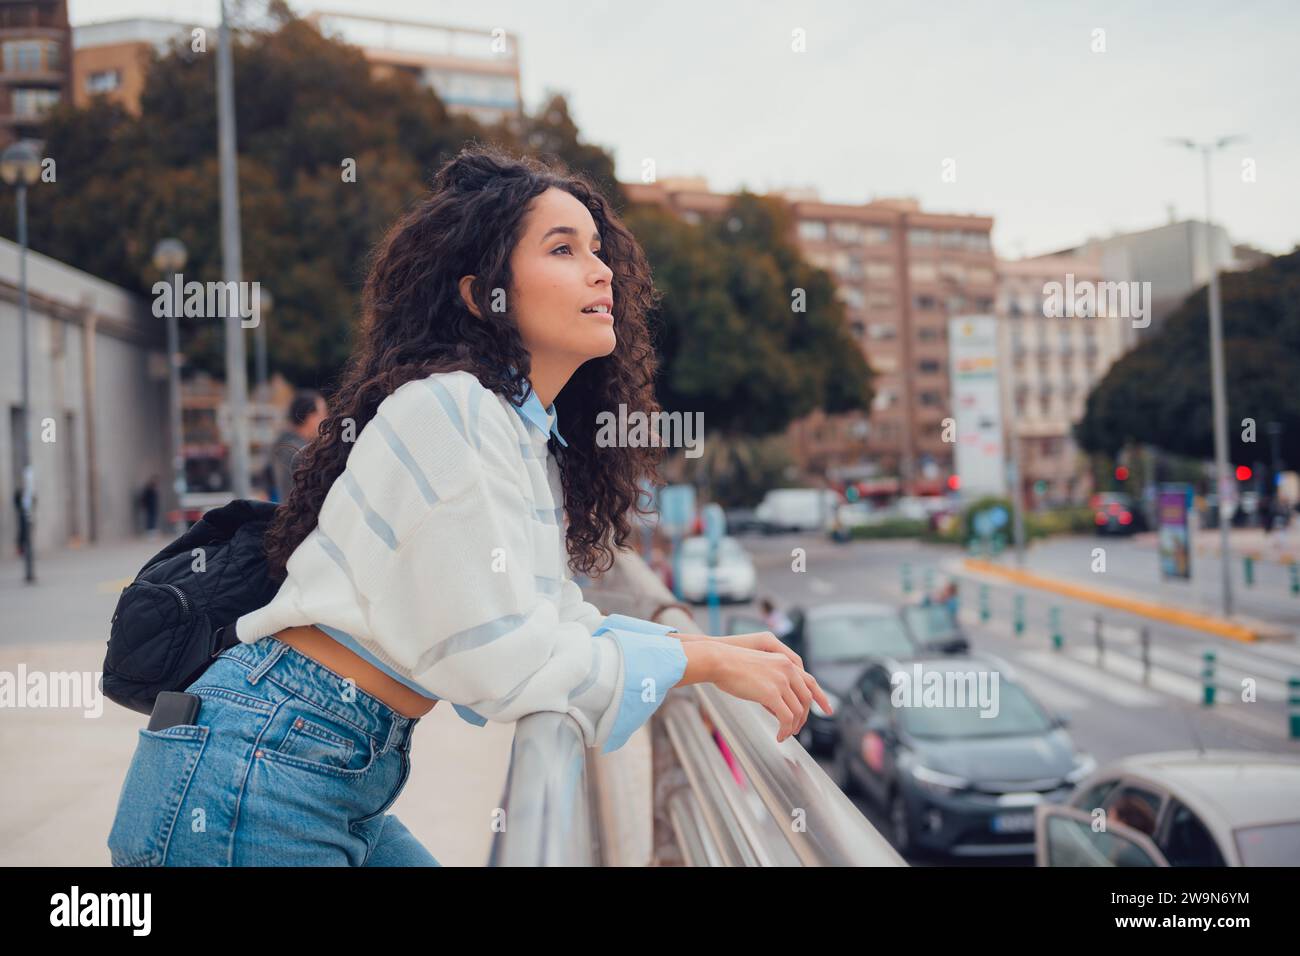 South American woman with curly hair looking towards the city Stock Photo